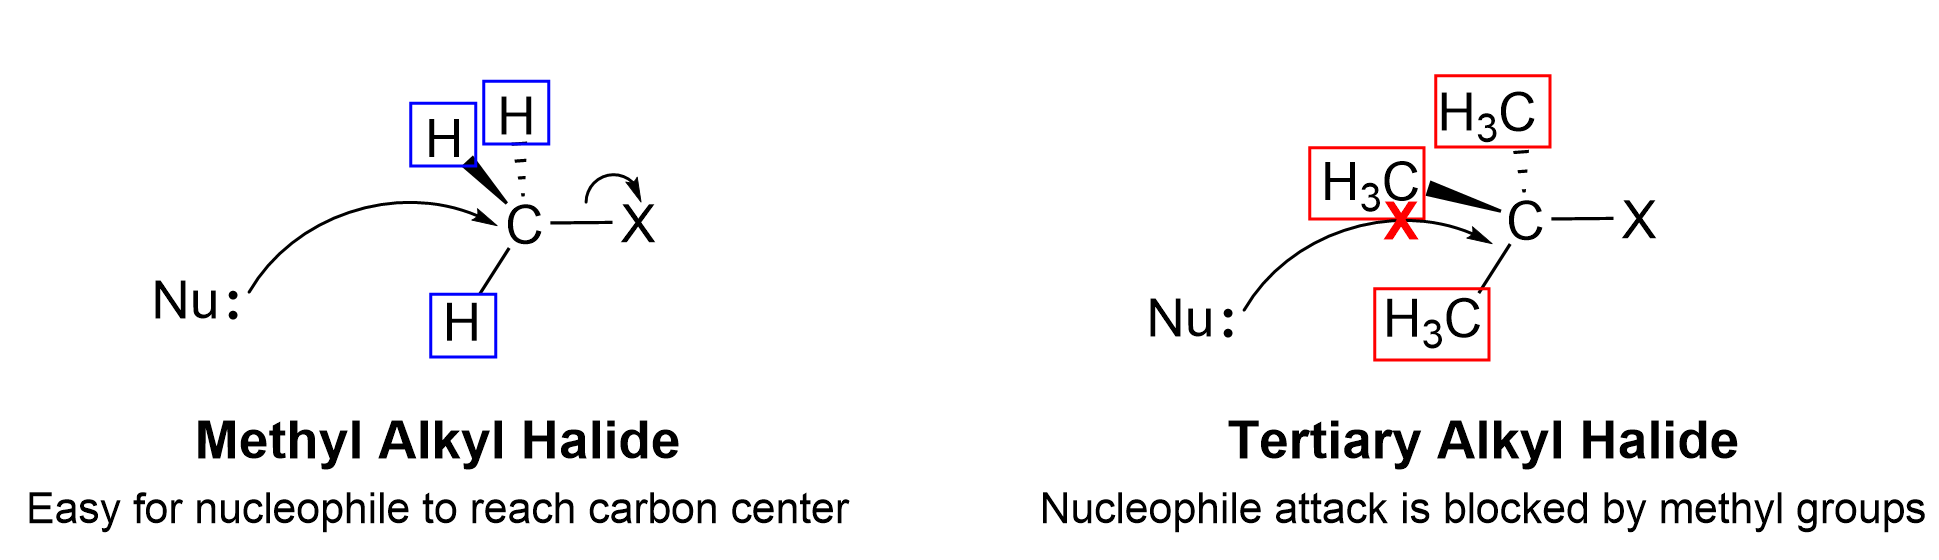 A C attached to a halide denoted as X, and 3 H’s, outlined with a blue box on each. A nucleophile (Nu) that has a lone pair shows the tail end of a curved arrow from the lone pair pointing its head to the C, and a smaller curved arrow’s tail from the bond between C and X pointing its head towards X. The label below is “Methyl alkyl halide” and the subtitle is “easy for nucleophile to reach carbon center”. On the right half is the same carbon compound but instead of H’s, it’s methyl groups outlined with a red box. The tail end of the curved arrow from the Nu pointing its head towards the carbon has a red cross/x with the label “tertiary alkyl halide” and the subtitle “nucleophile attack is blocked by methyl groups.